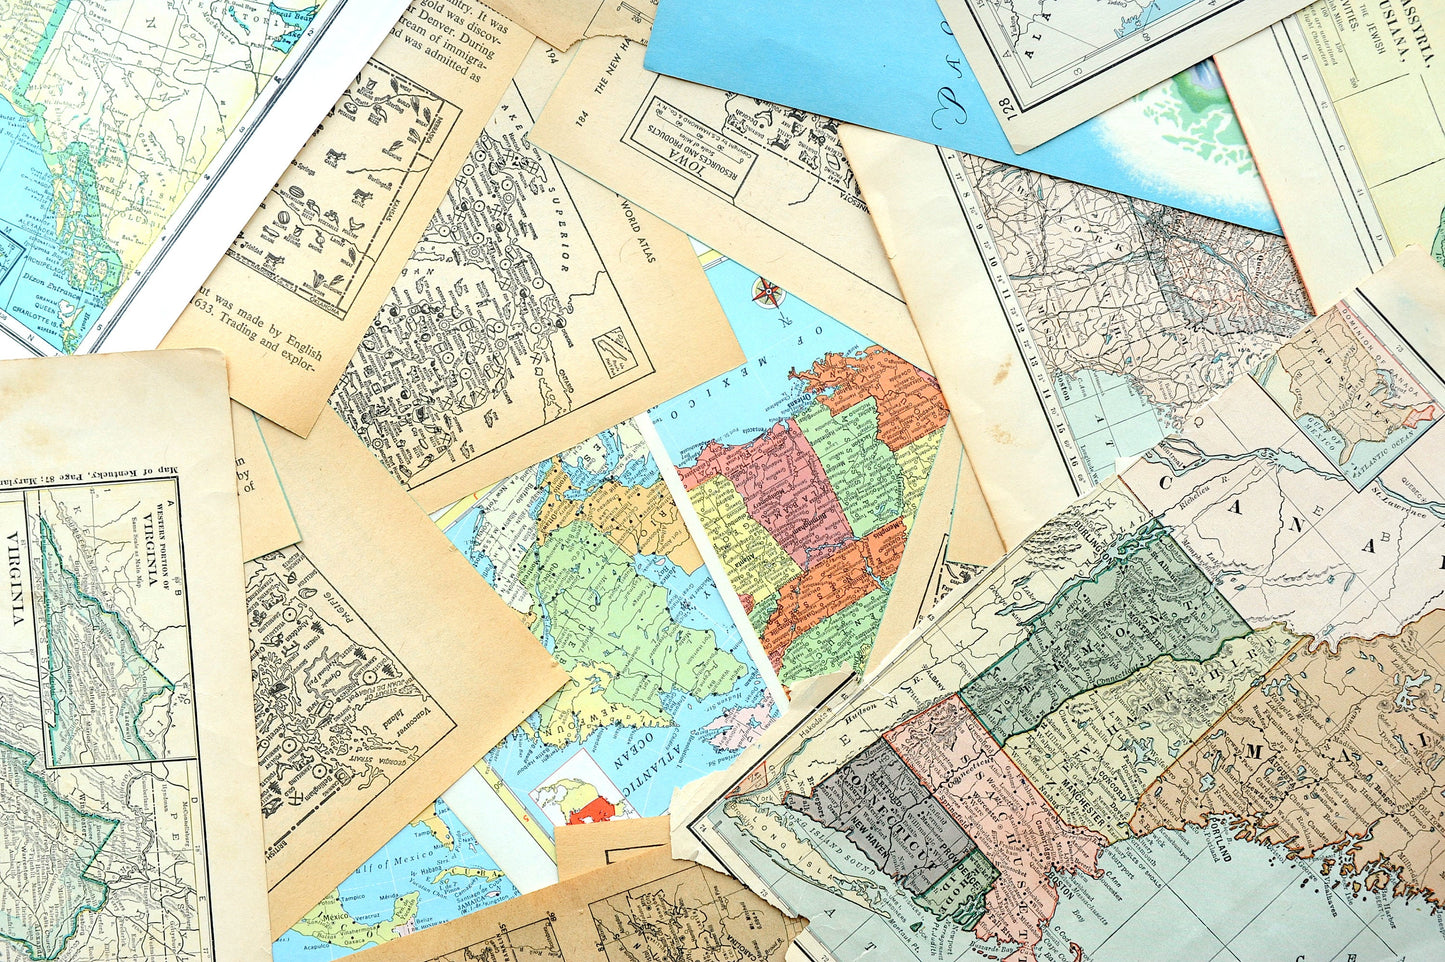 Papers for repurposing: 1/8 lb mix of vintage map & atlas pages